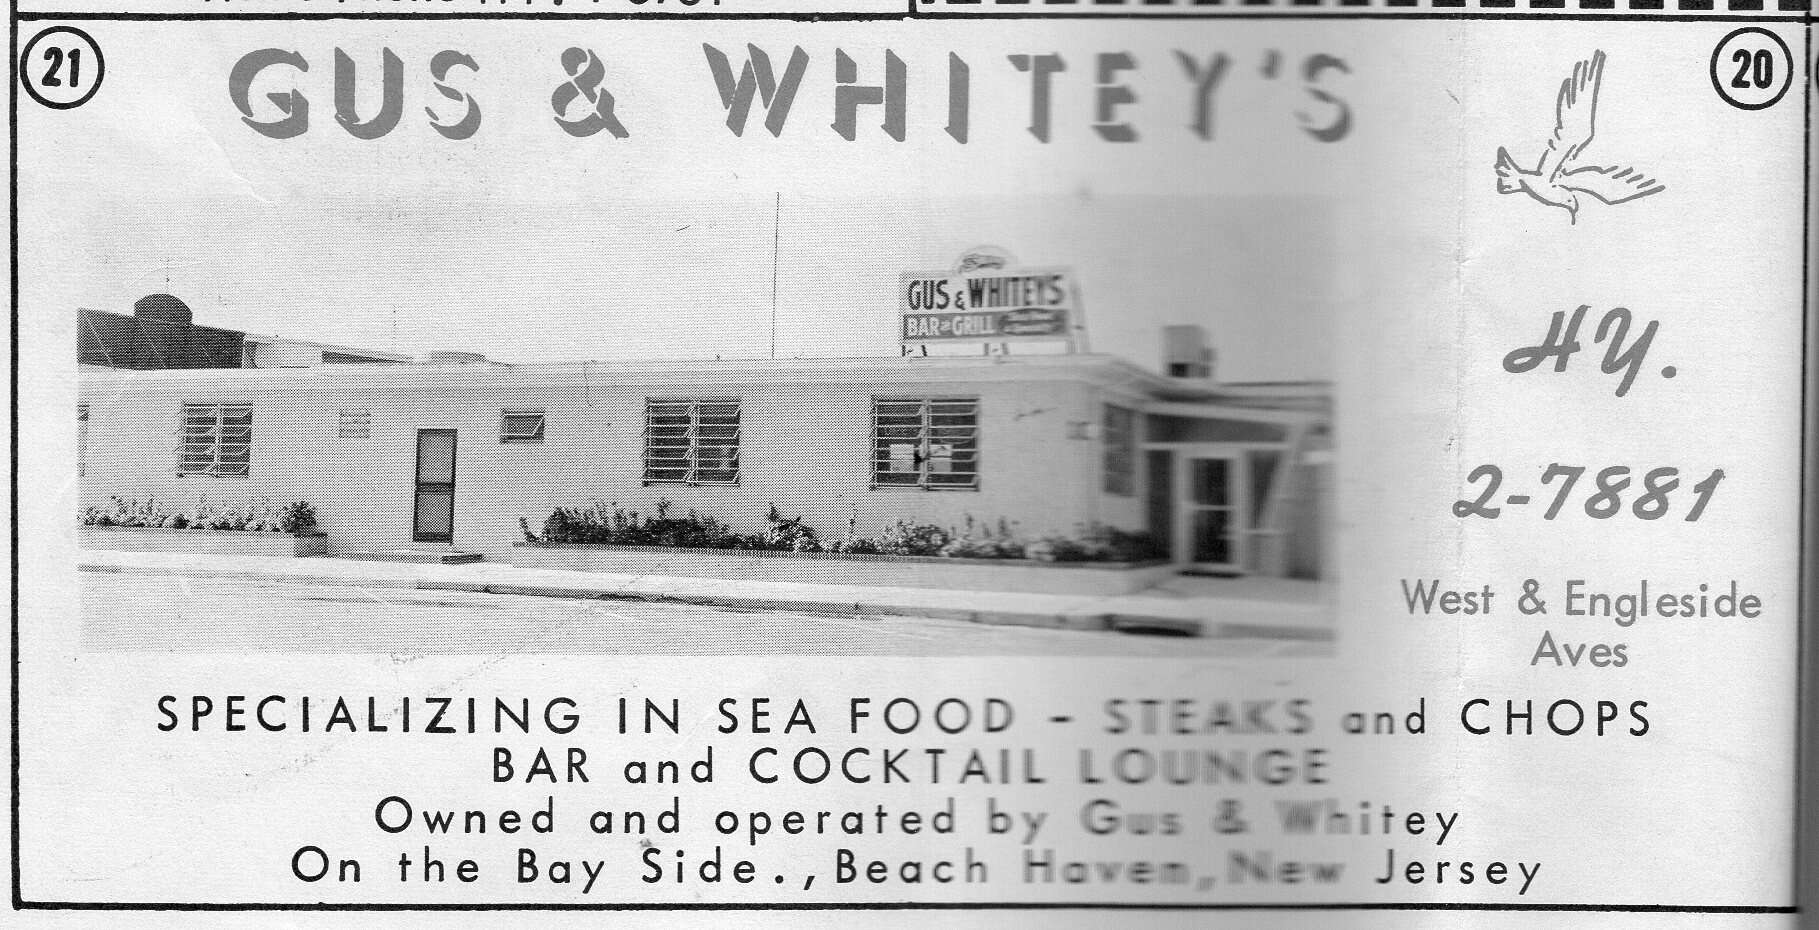 An ad from 1963 for Gus and Whitey's bar and cocktail lounge in Beach Haven, NJ